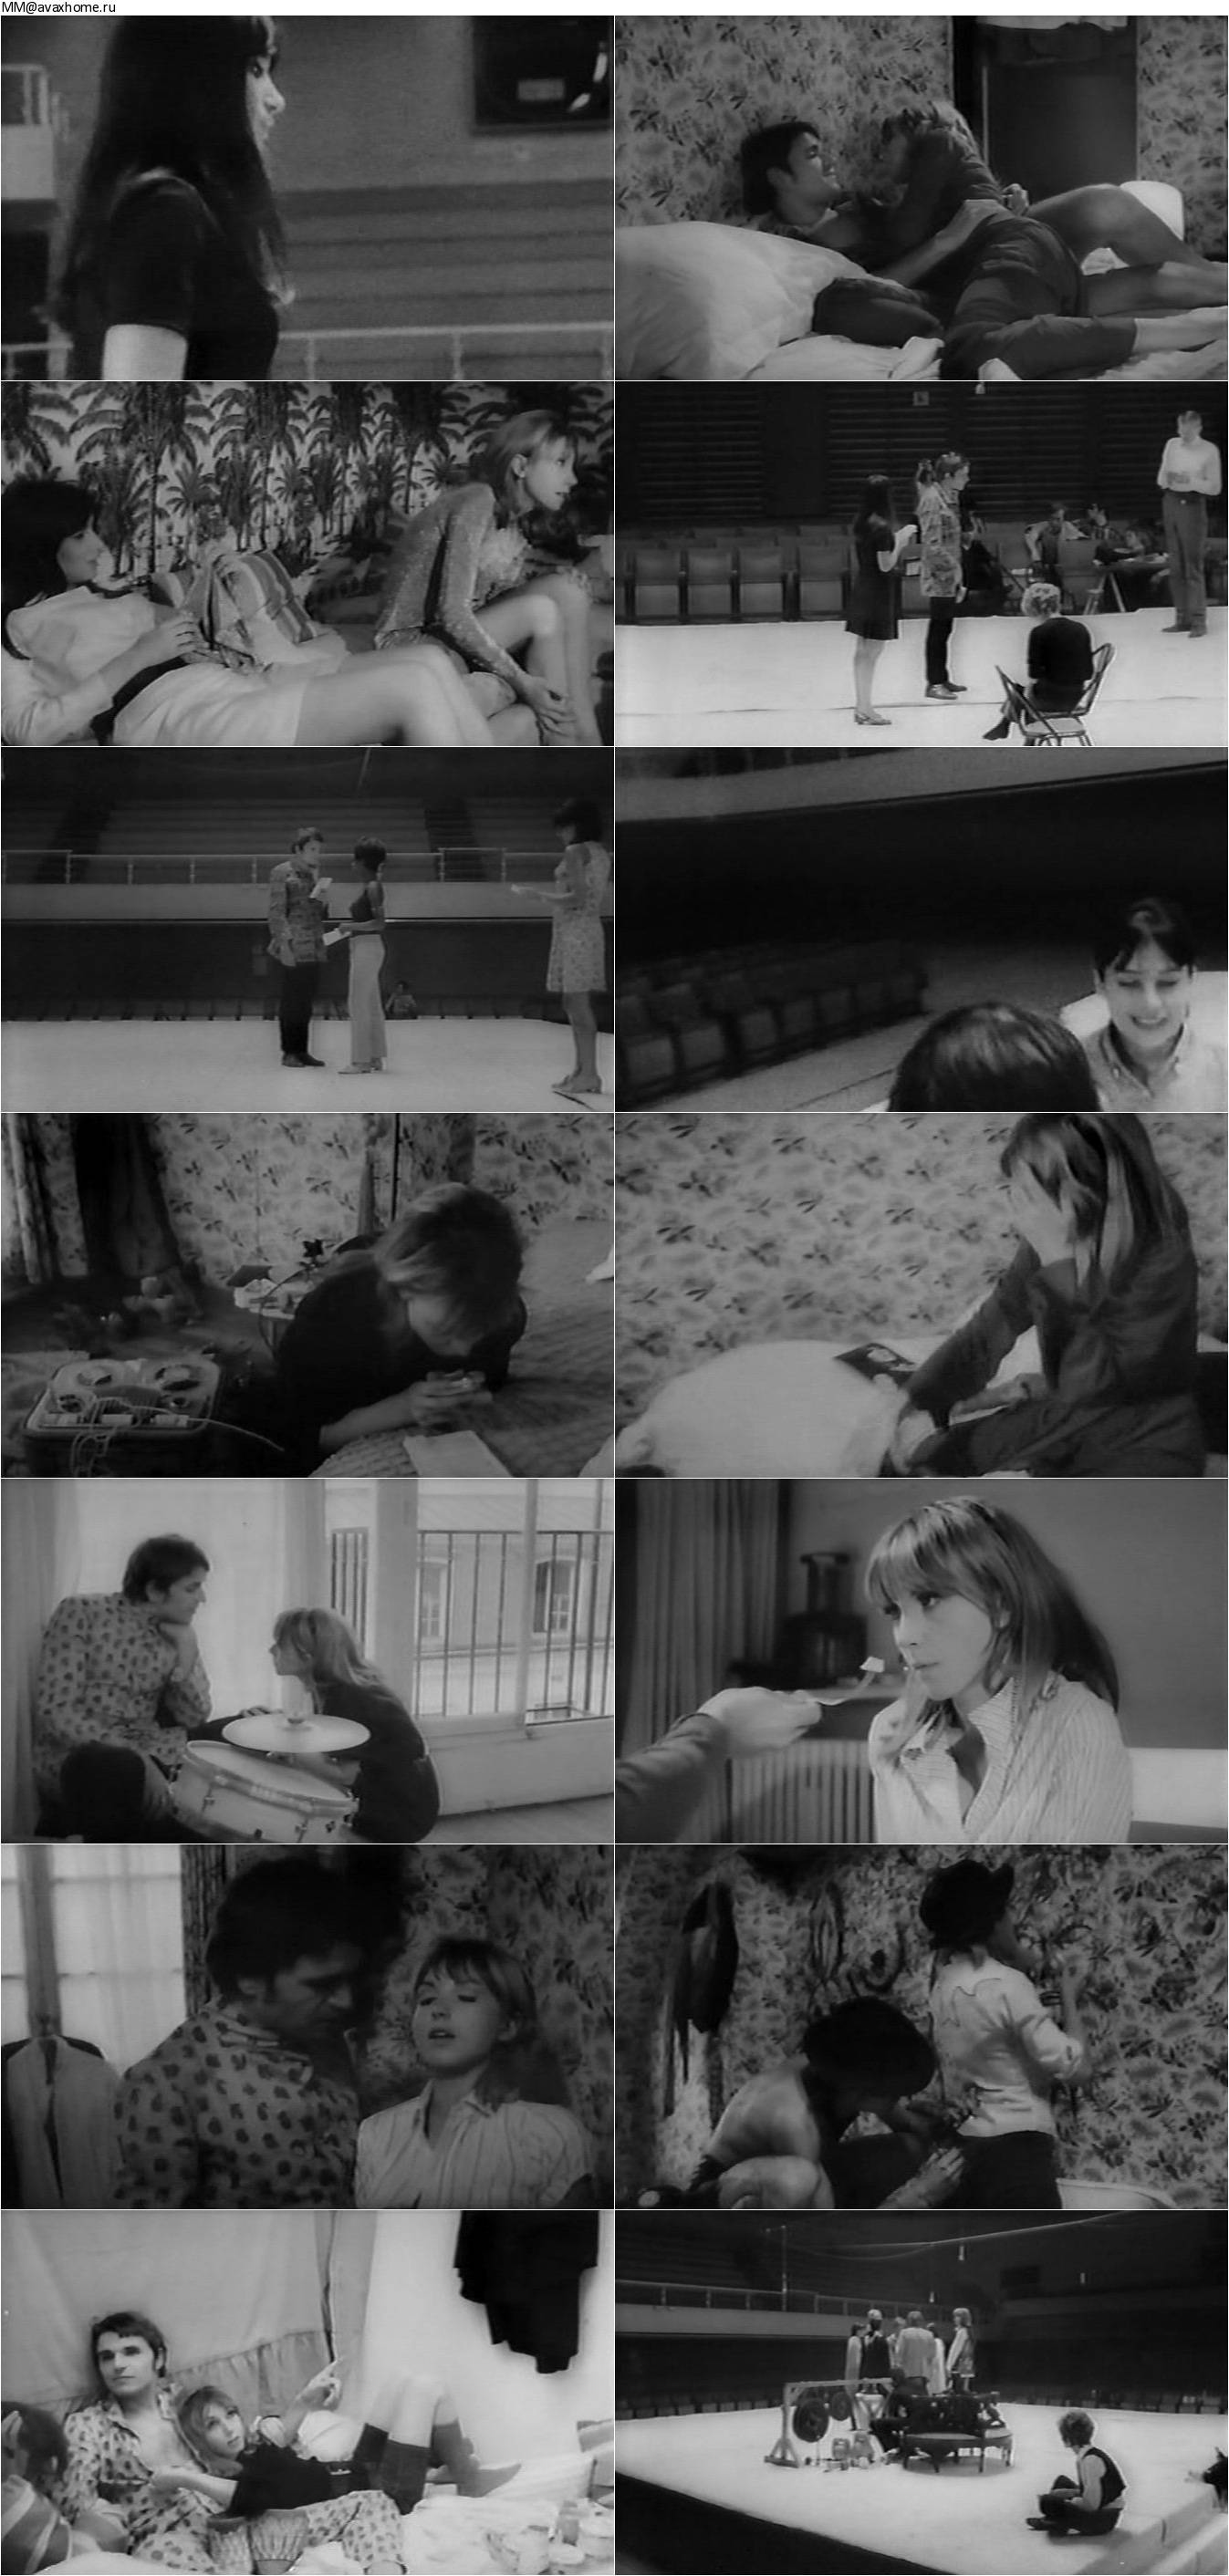 Mad Love (1969) L'amour fou